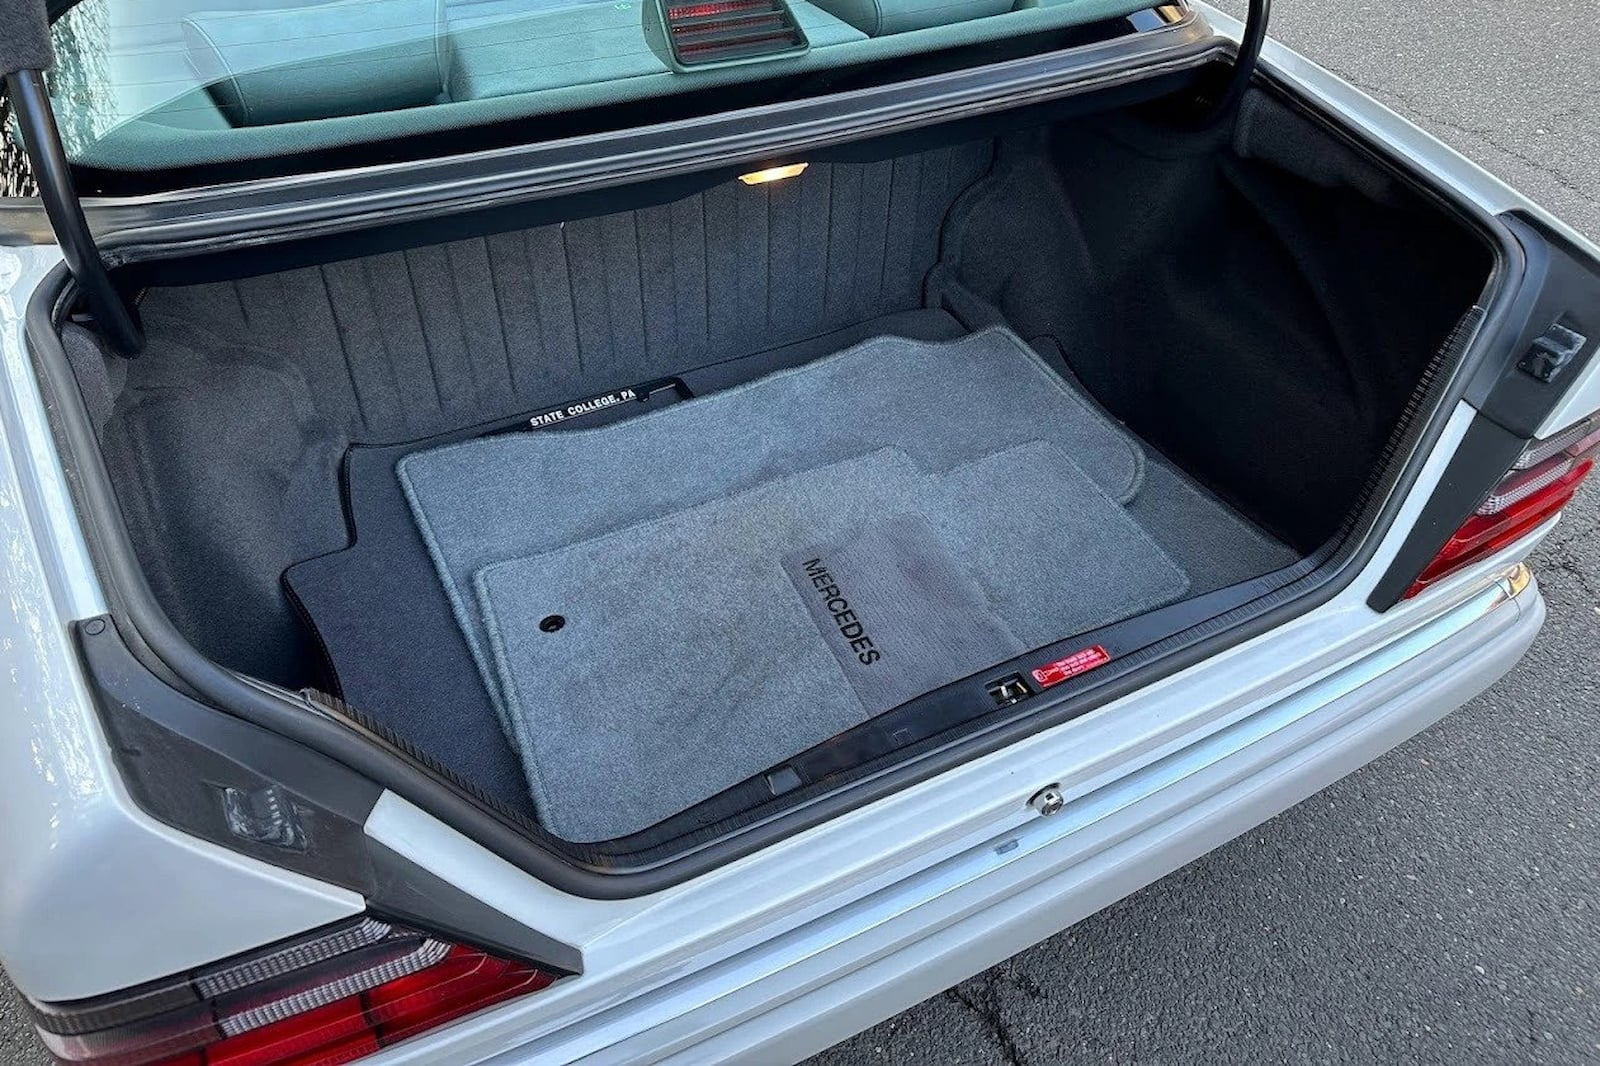 The trunk and little-known things: Mercedes changes everything - Photo 10.